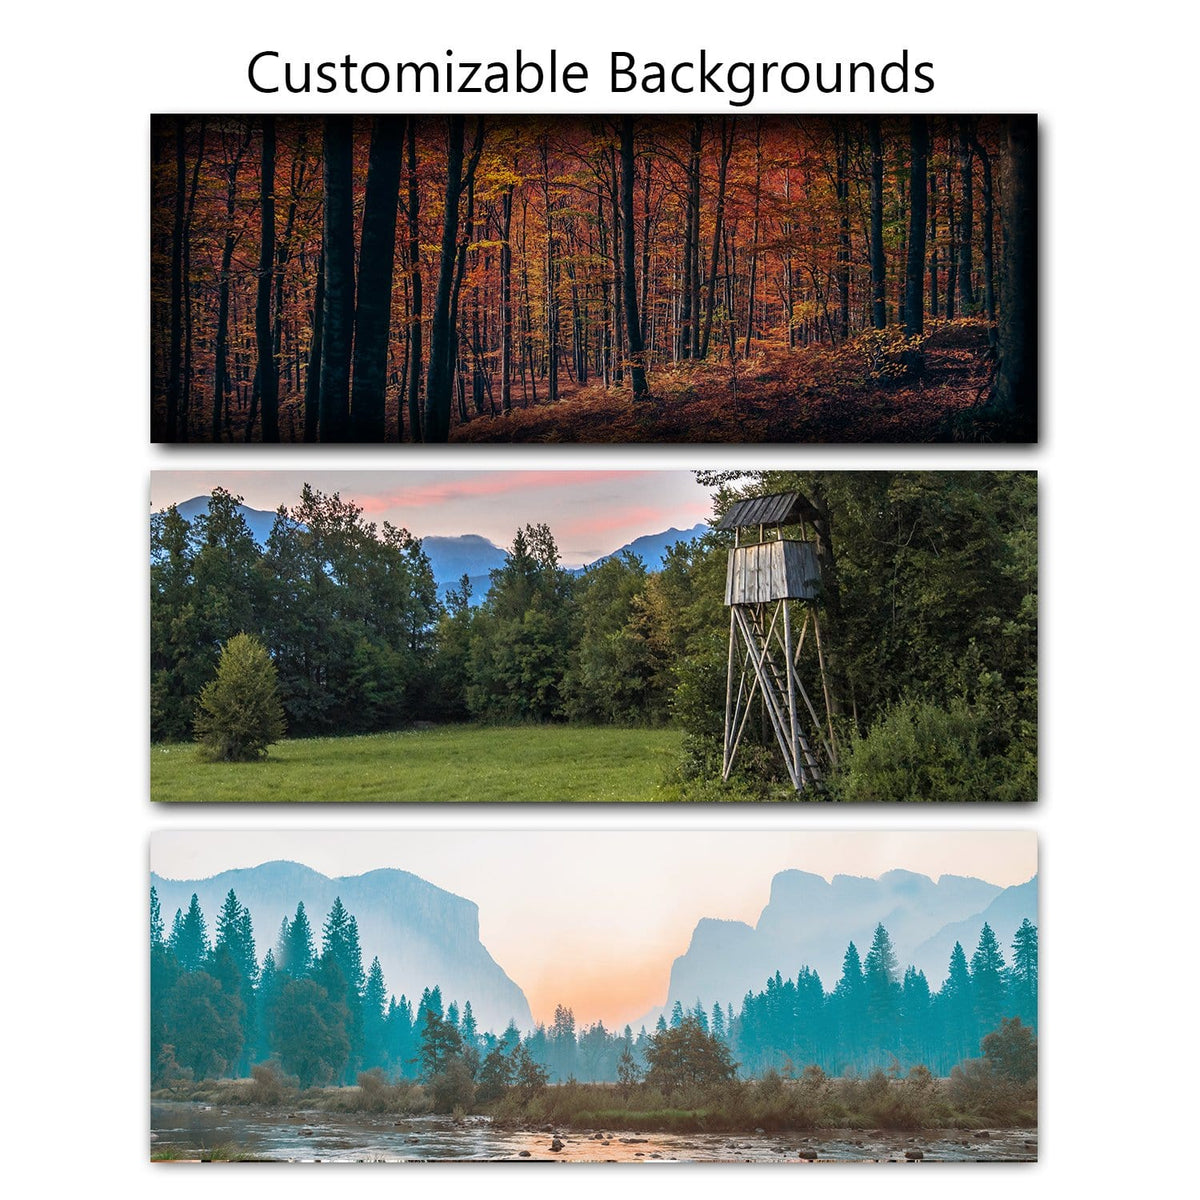 Select your own hunting background to further customize your gift